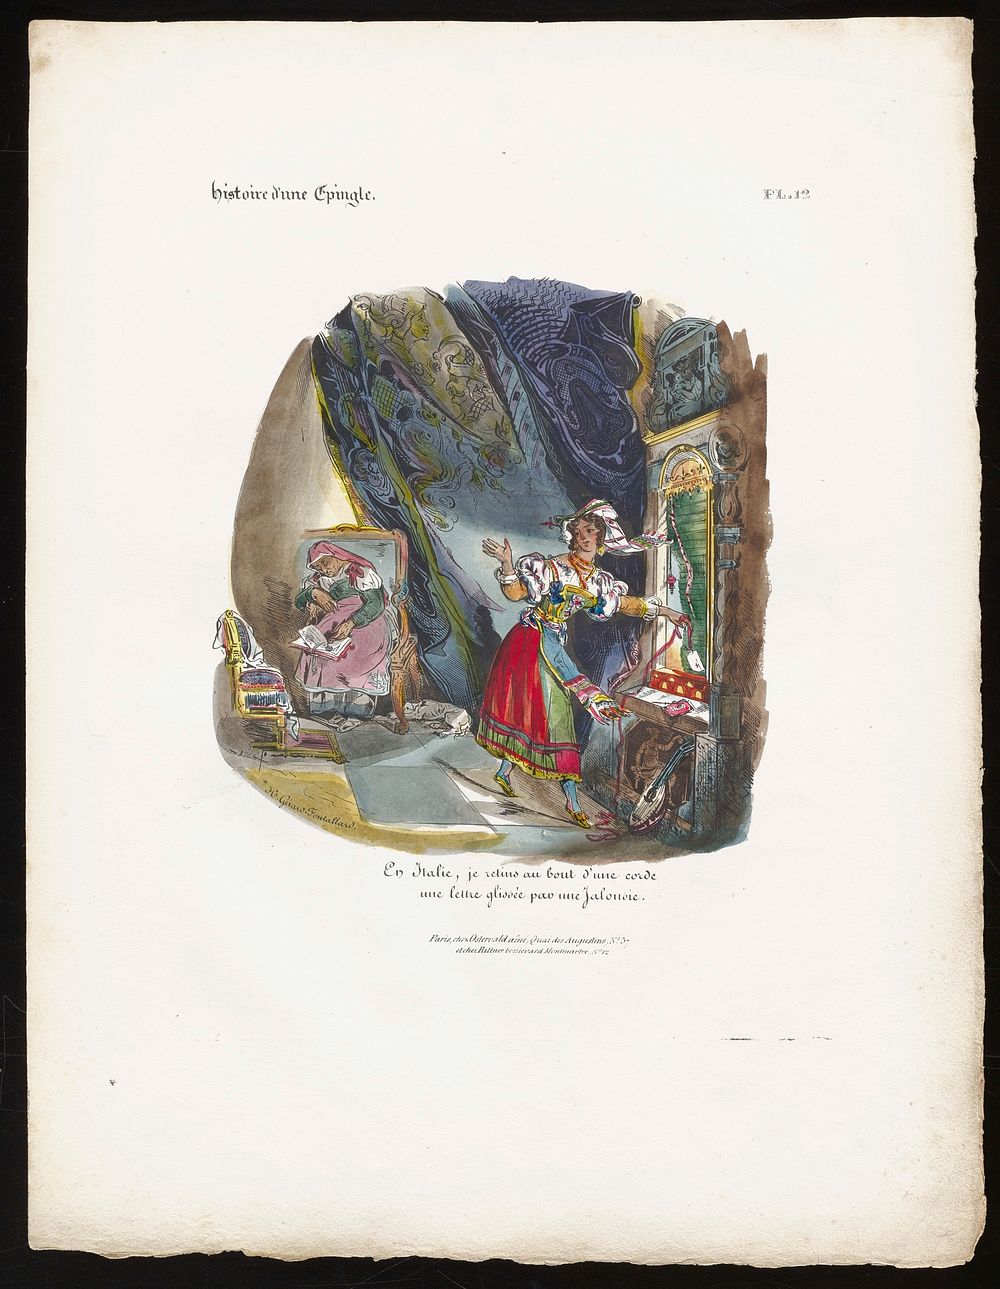 Fashion Plate from Histoire d'une Epingle. Original from the Minneapolis Institute of Art.